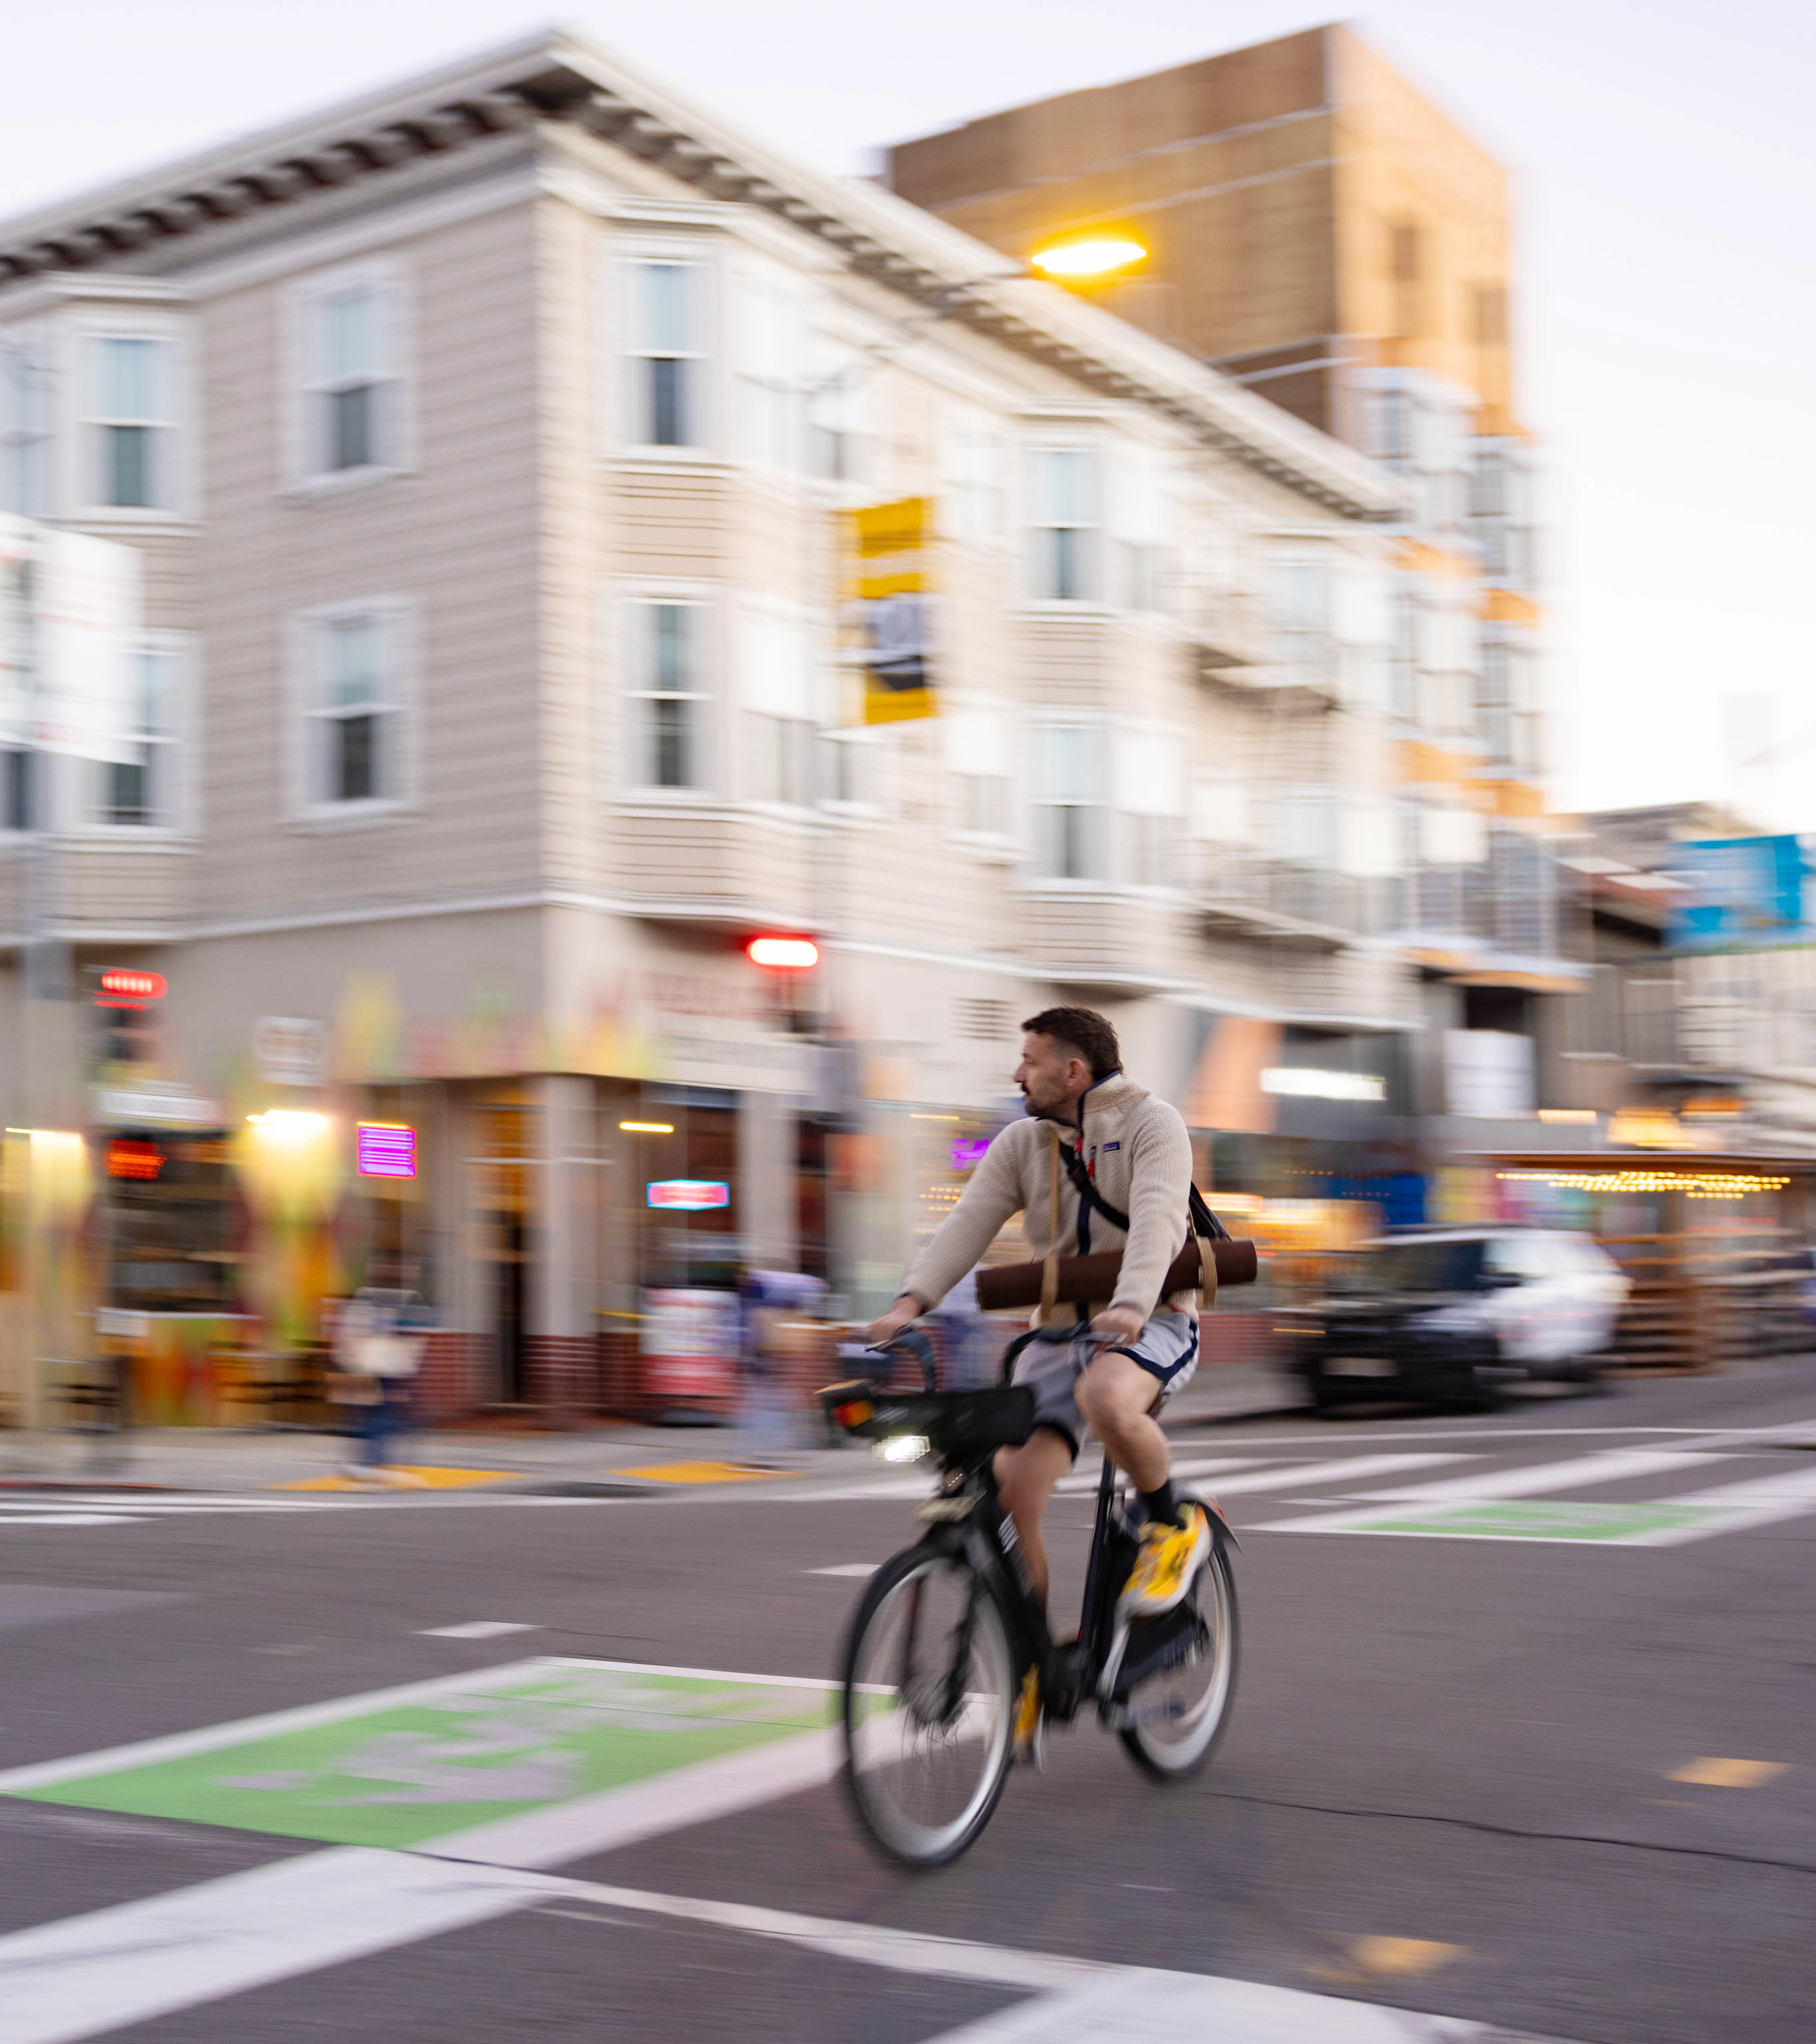 A blurred image of a person riding a bike across a city street intersection.